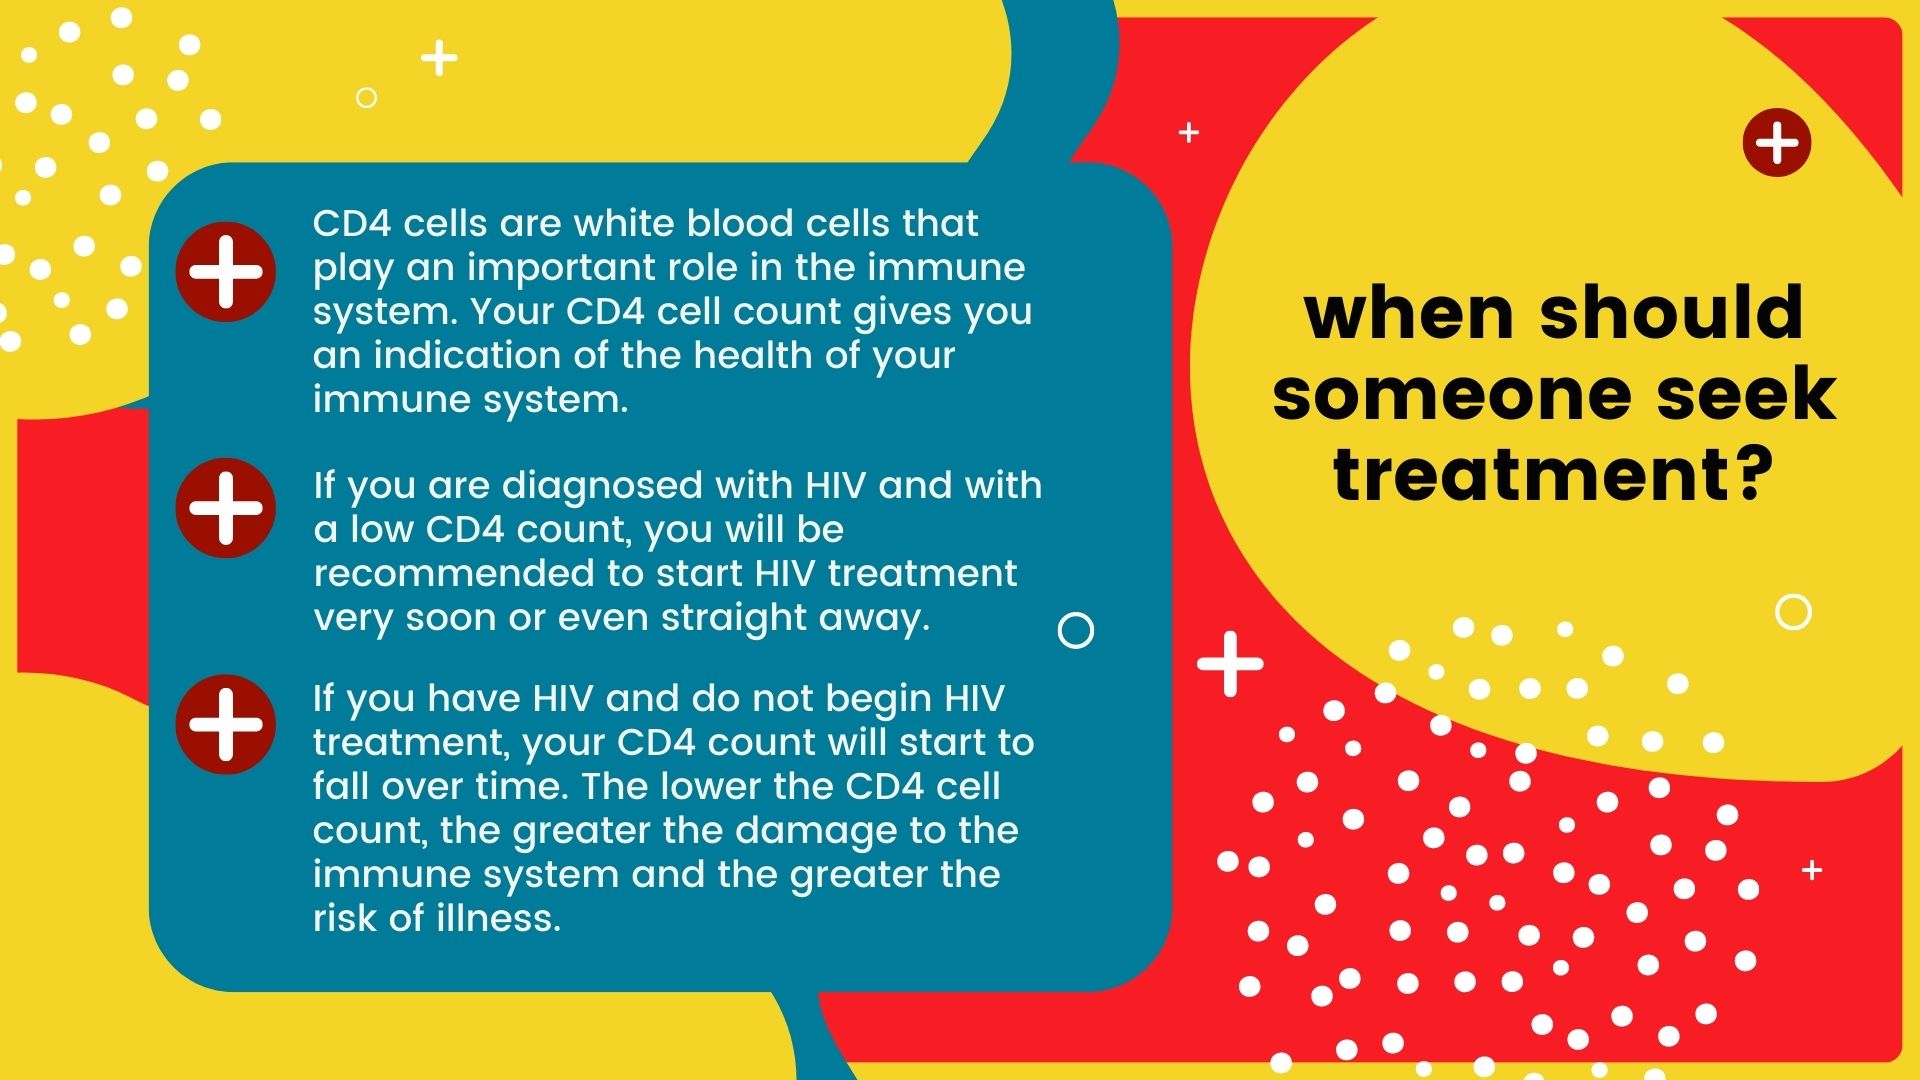 When should someone seek treatment for HIV?